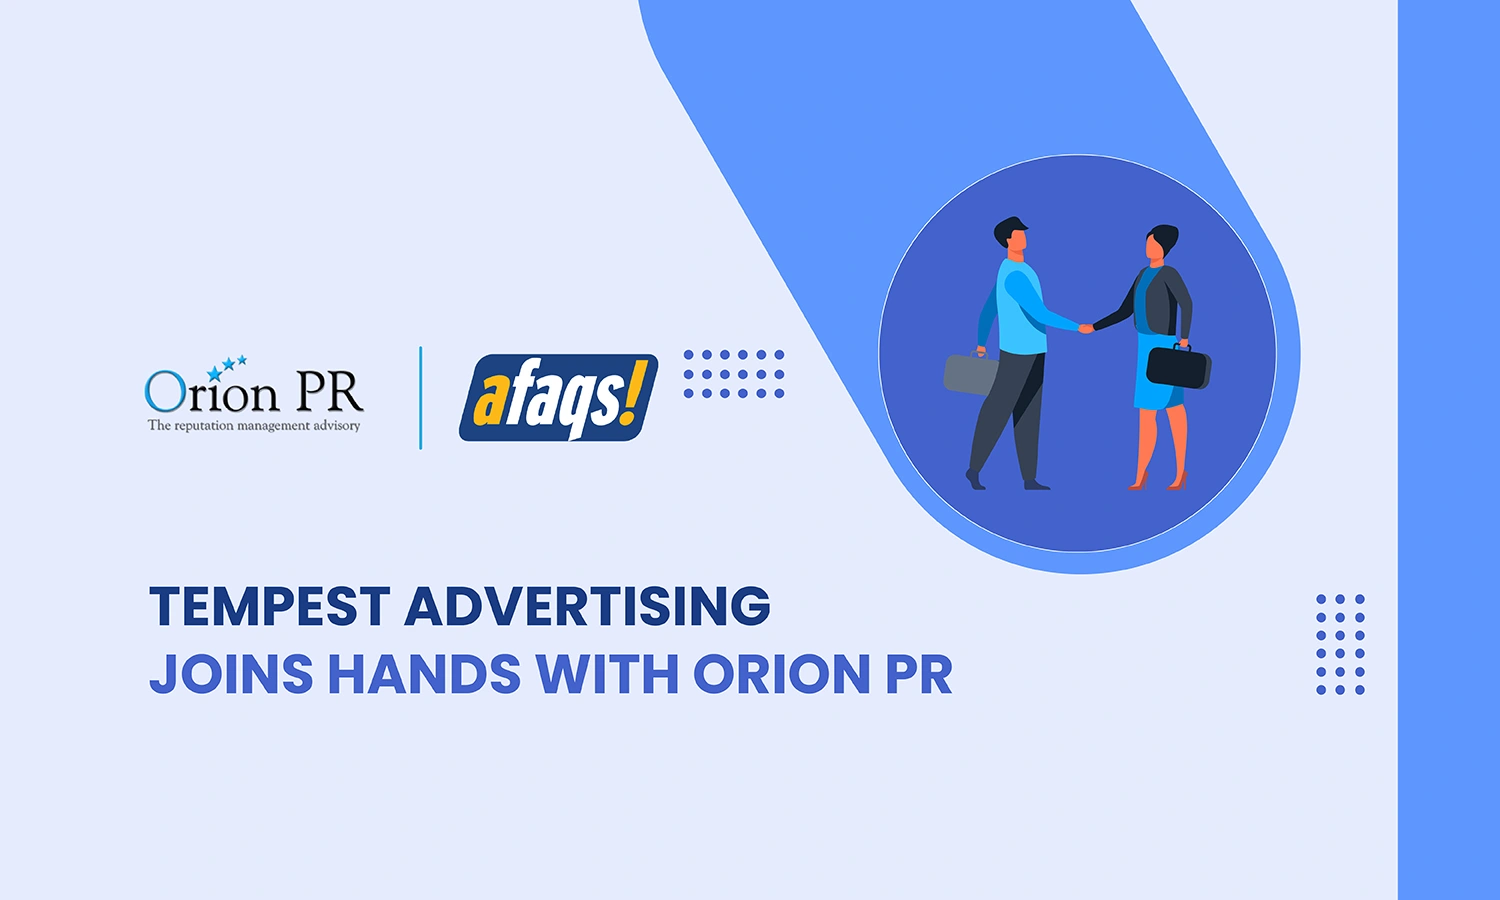 TEMPEST ADVERTISING JOINS HANDS WITH ORION PR